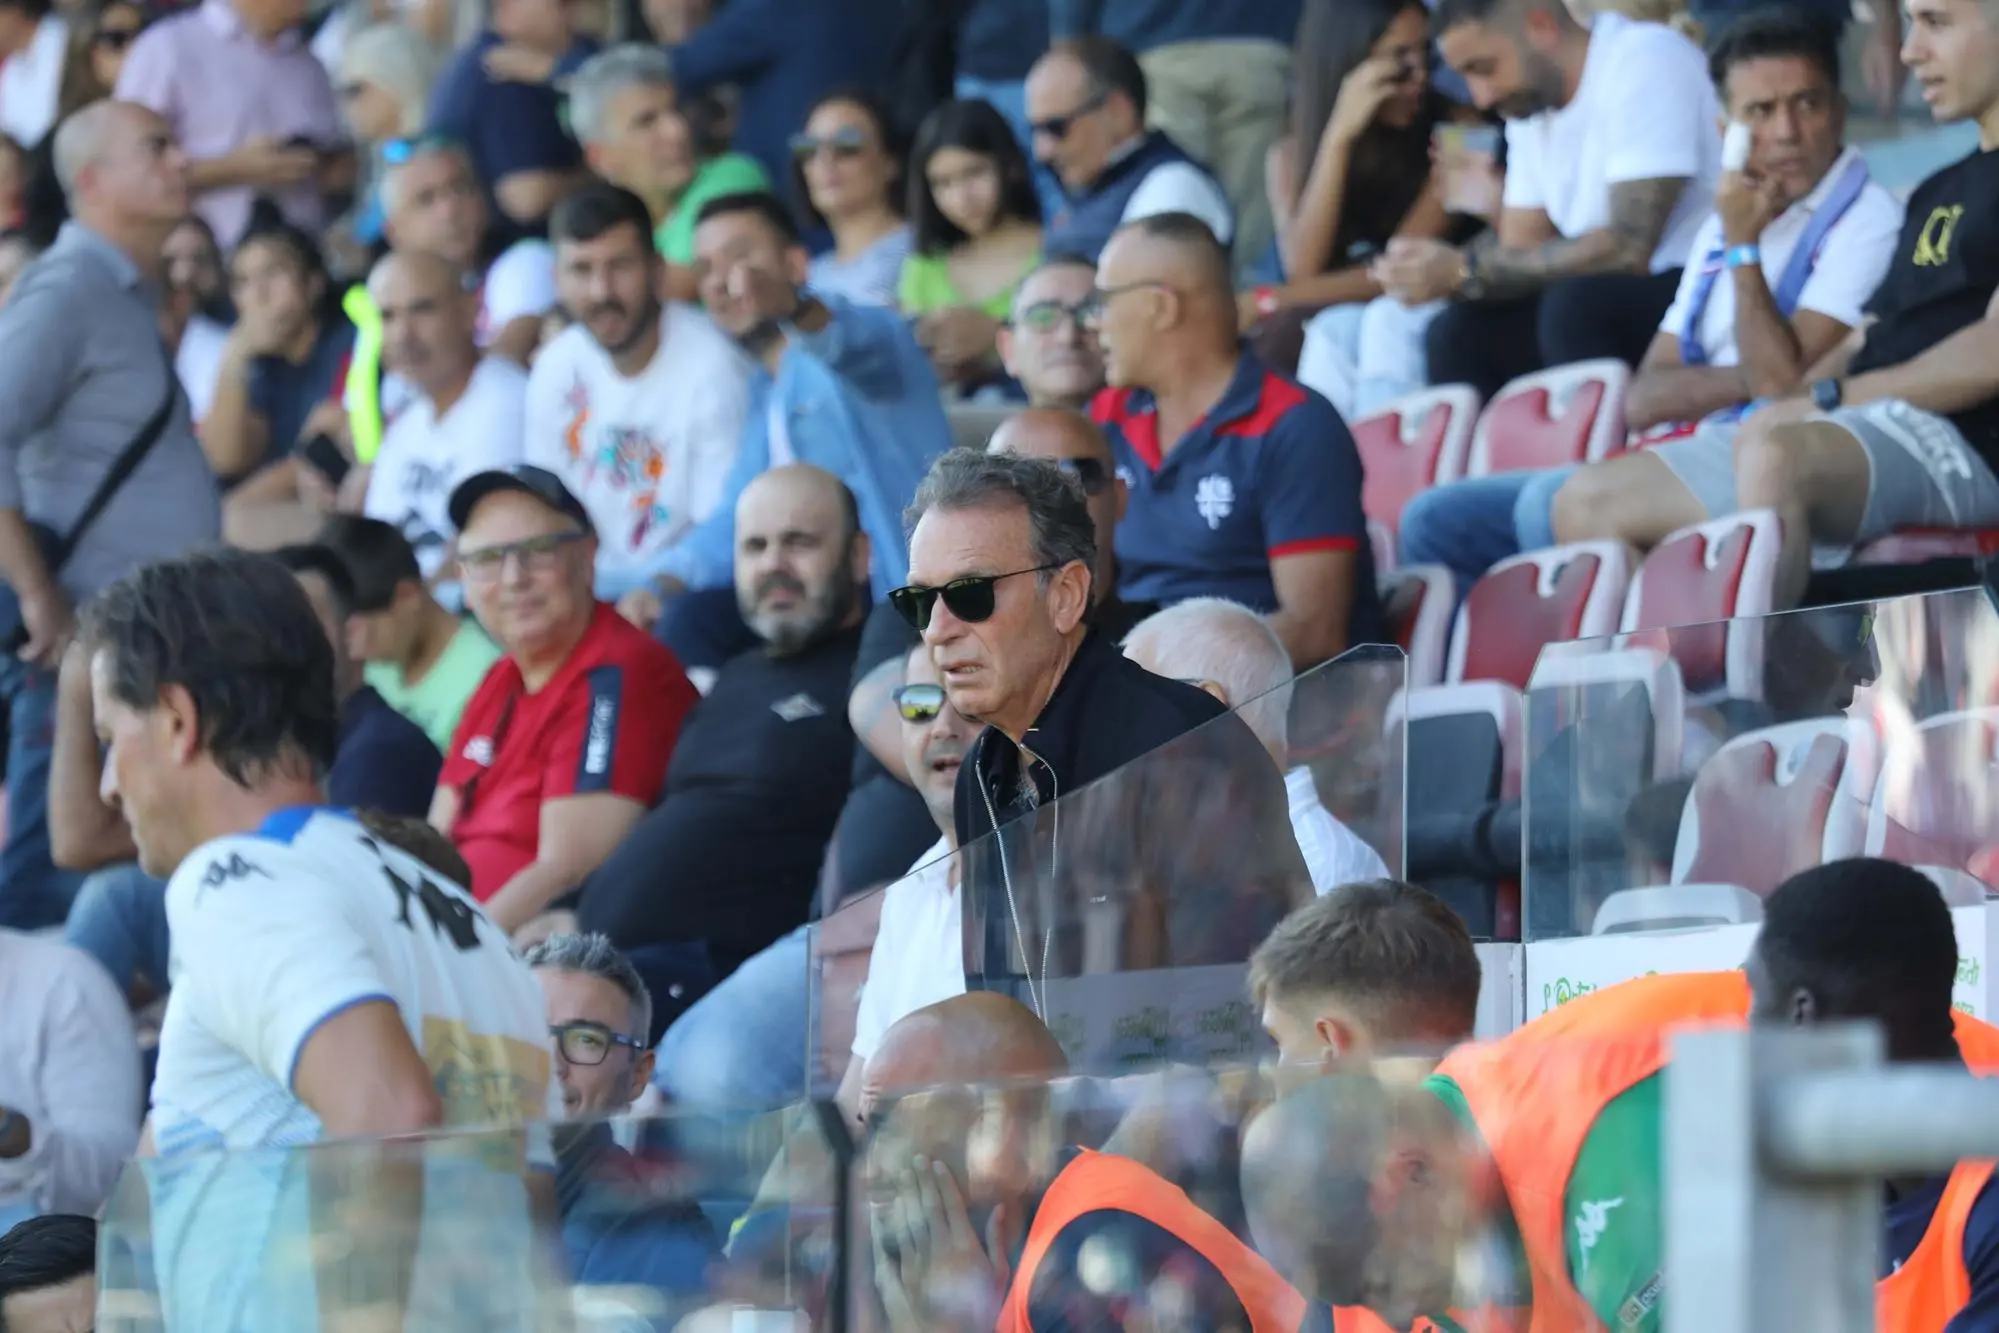 Massimo Cellino the grandstand at the Domus on 17 October, the day of the match lost against Cagliari (archive/Mx.S.)